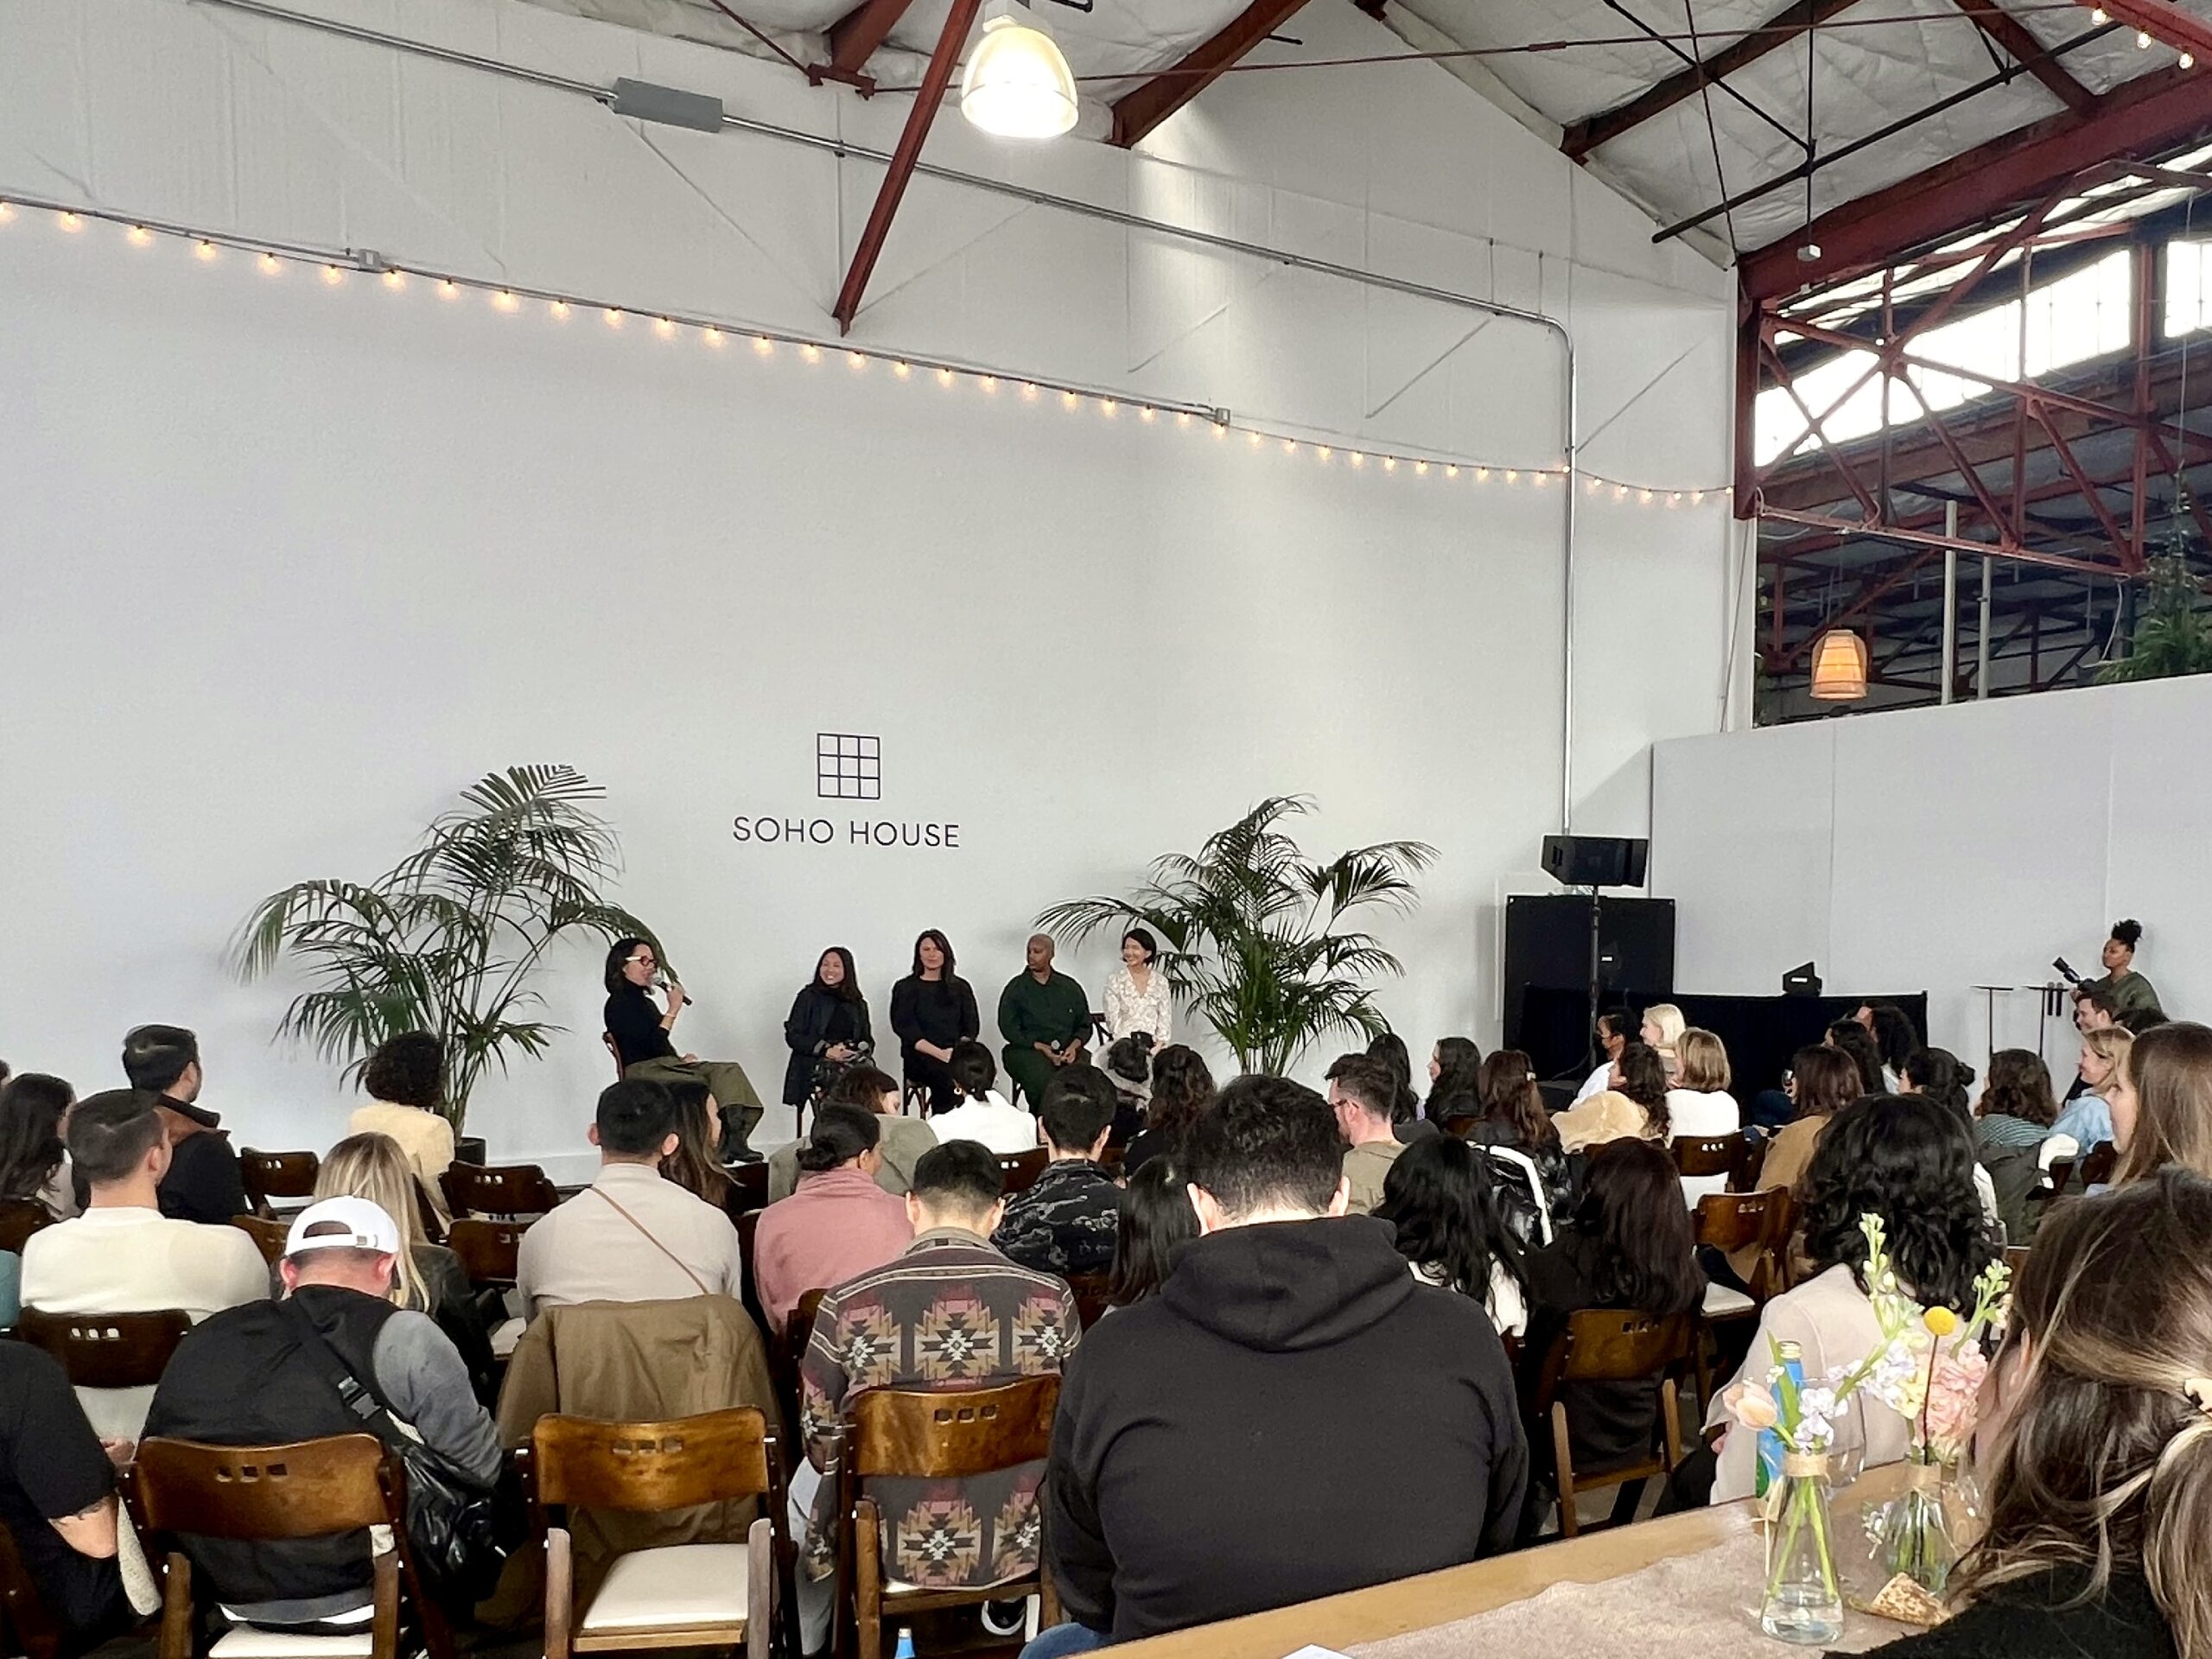 A panel of people are speaking at a creative space in Berkeley. The room has high ceilings and white walls.